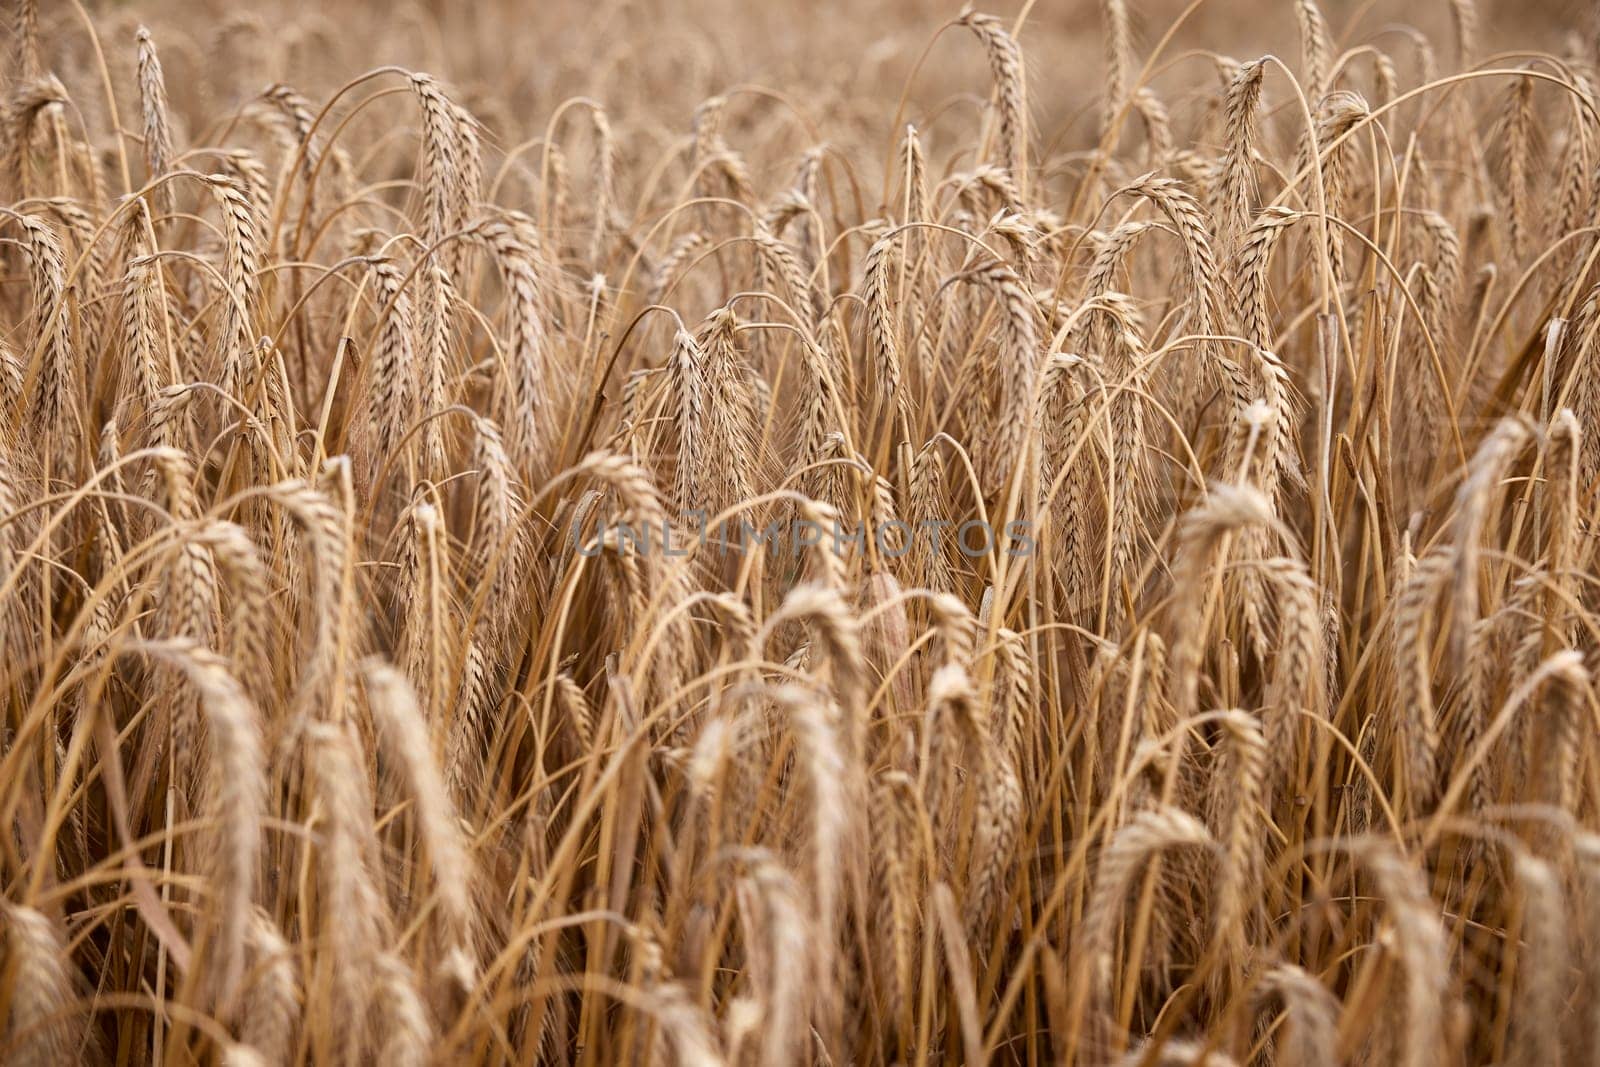 Ripe wheat, agricultural background. Golden wheat field in sunny day. Ears of wheat ripen in the field. Wheat field before harvesting, agriculture.